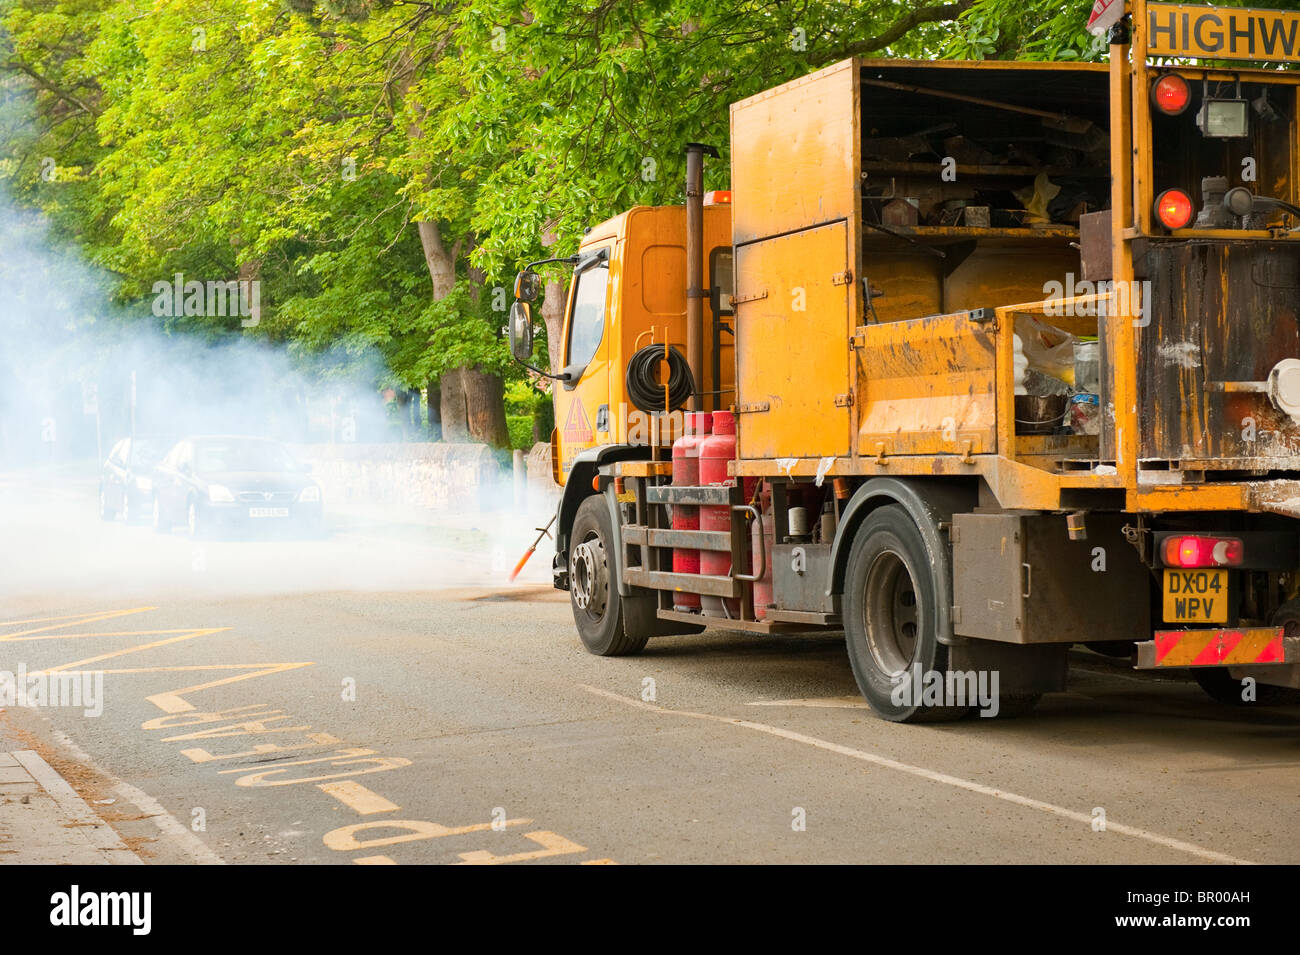 Road marking yellow lines being removed by burning off Stock Photo